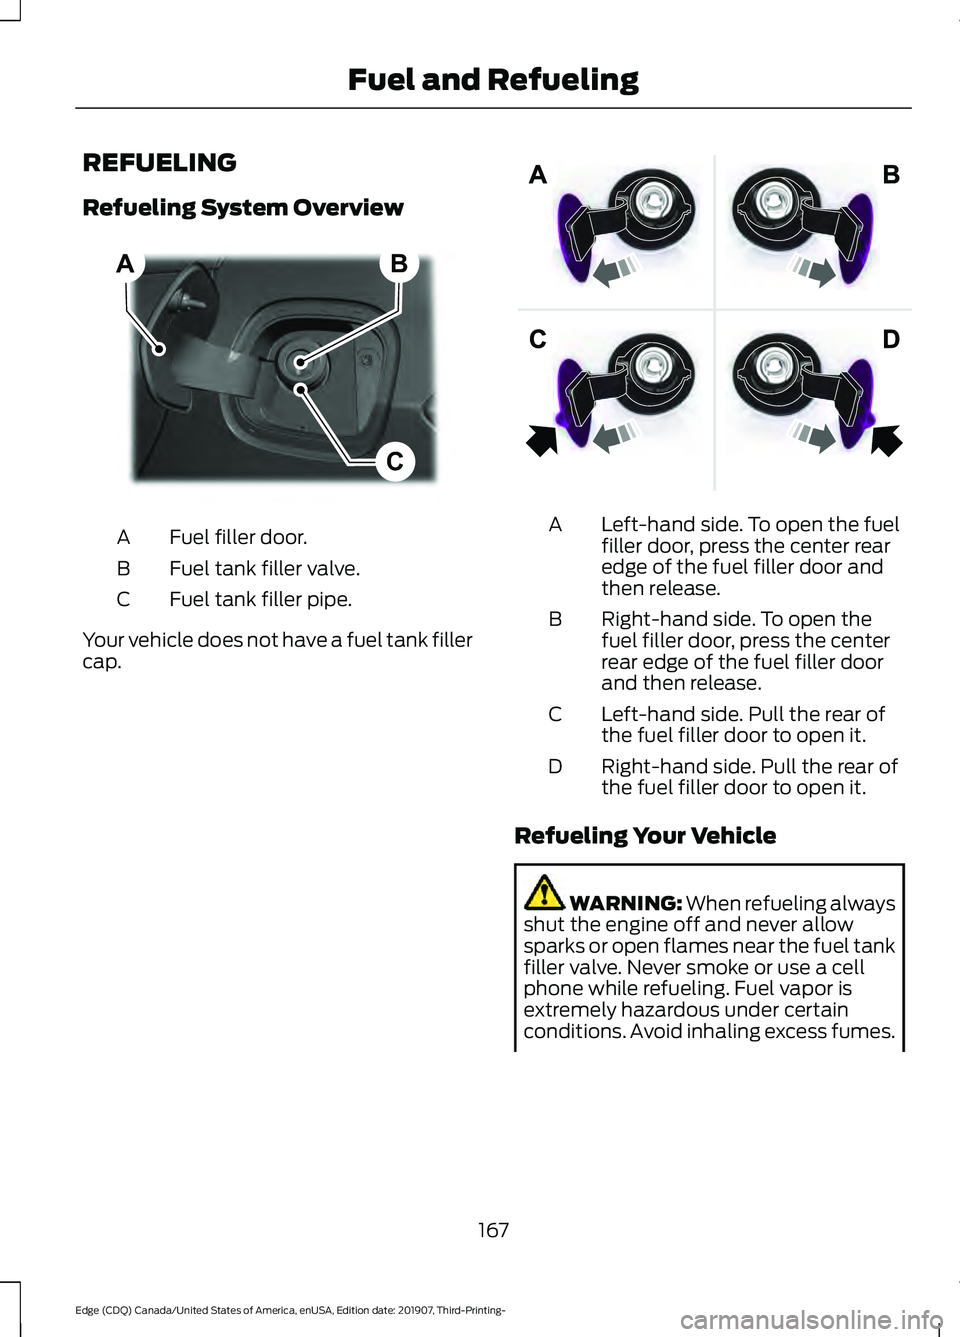 FORD EDGE 2020  Owners Manual REFUELING
Refueling System Overview
Fuel filler door.
A
Fuel tank filler valve.
B
Fuel tank filler pipe.
C
Your vehicle does not have a fuel tank filler
cap. Left-hand side. To open the fuel
filler do